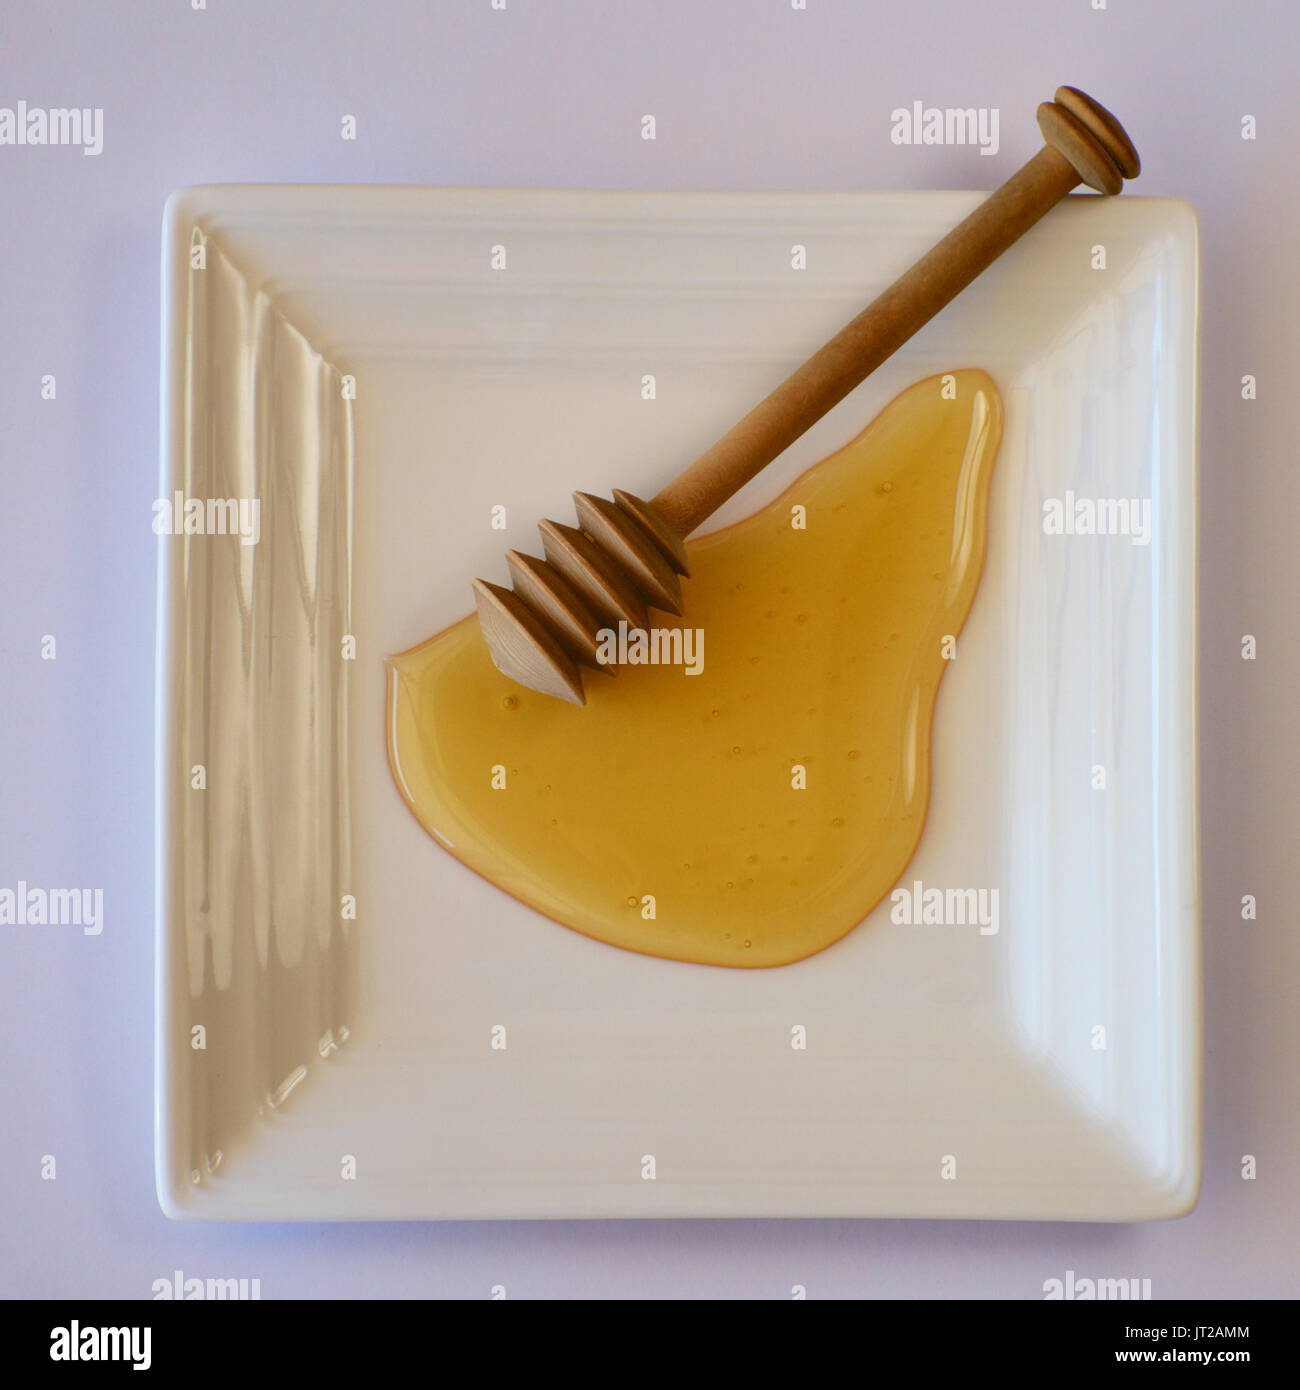 Australian honey on a white plate with a honey dipper. Stock Photo